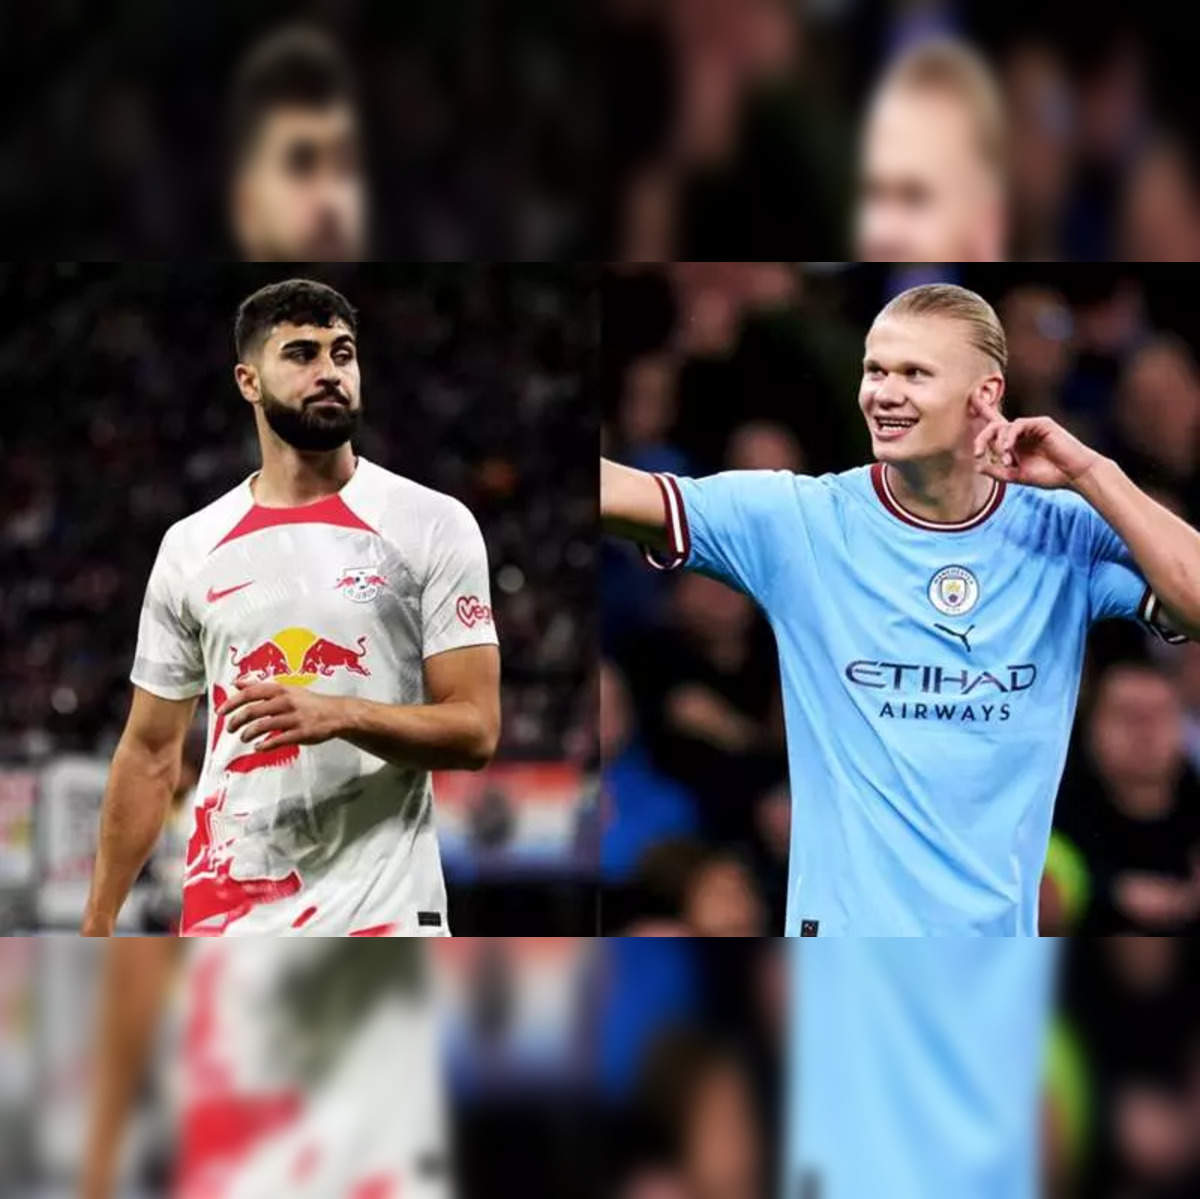 Manchester City vs RB Leipzig Live streaming, kick off time, where to watch UEFA Champions League